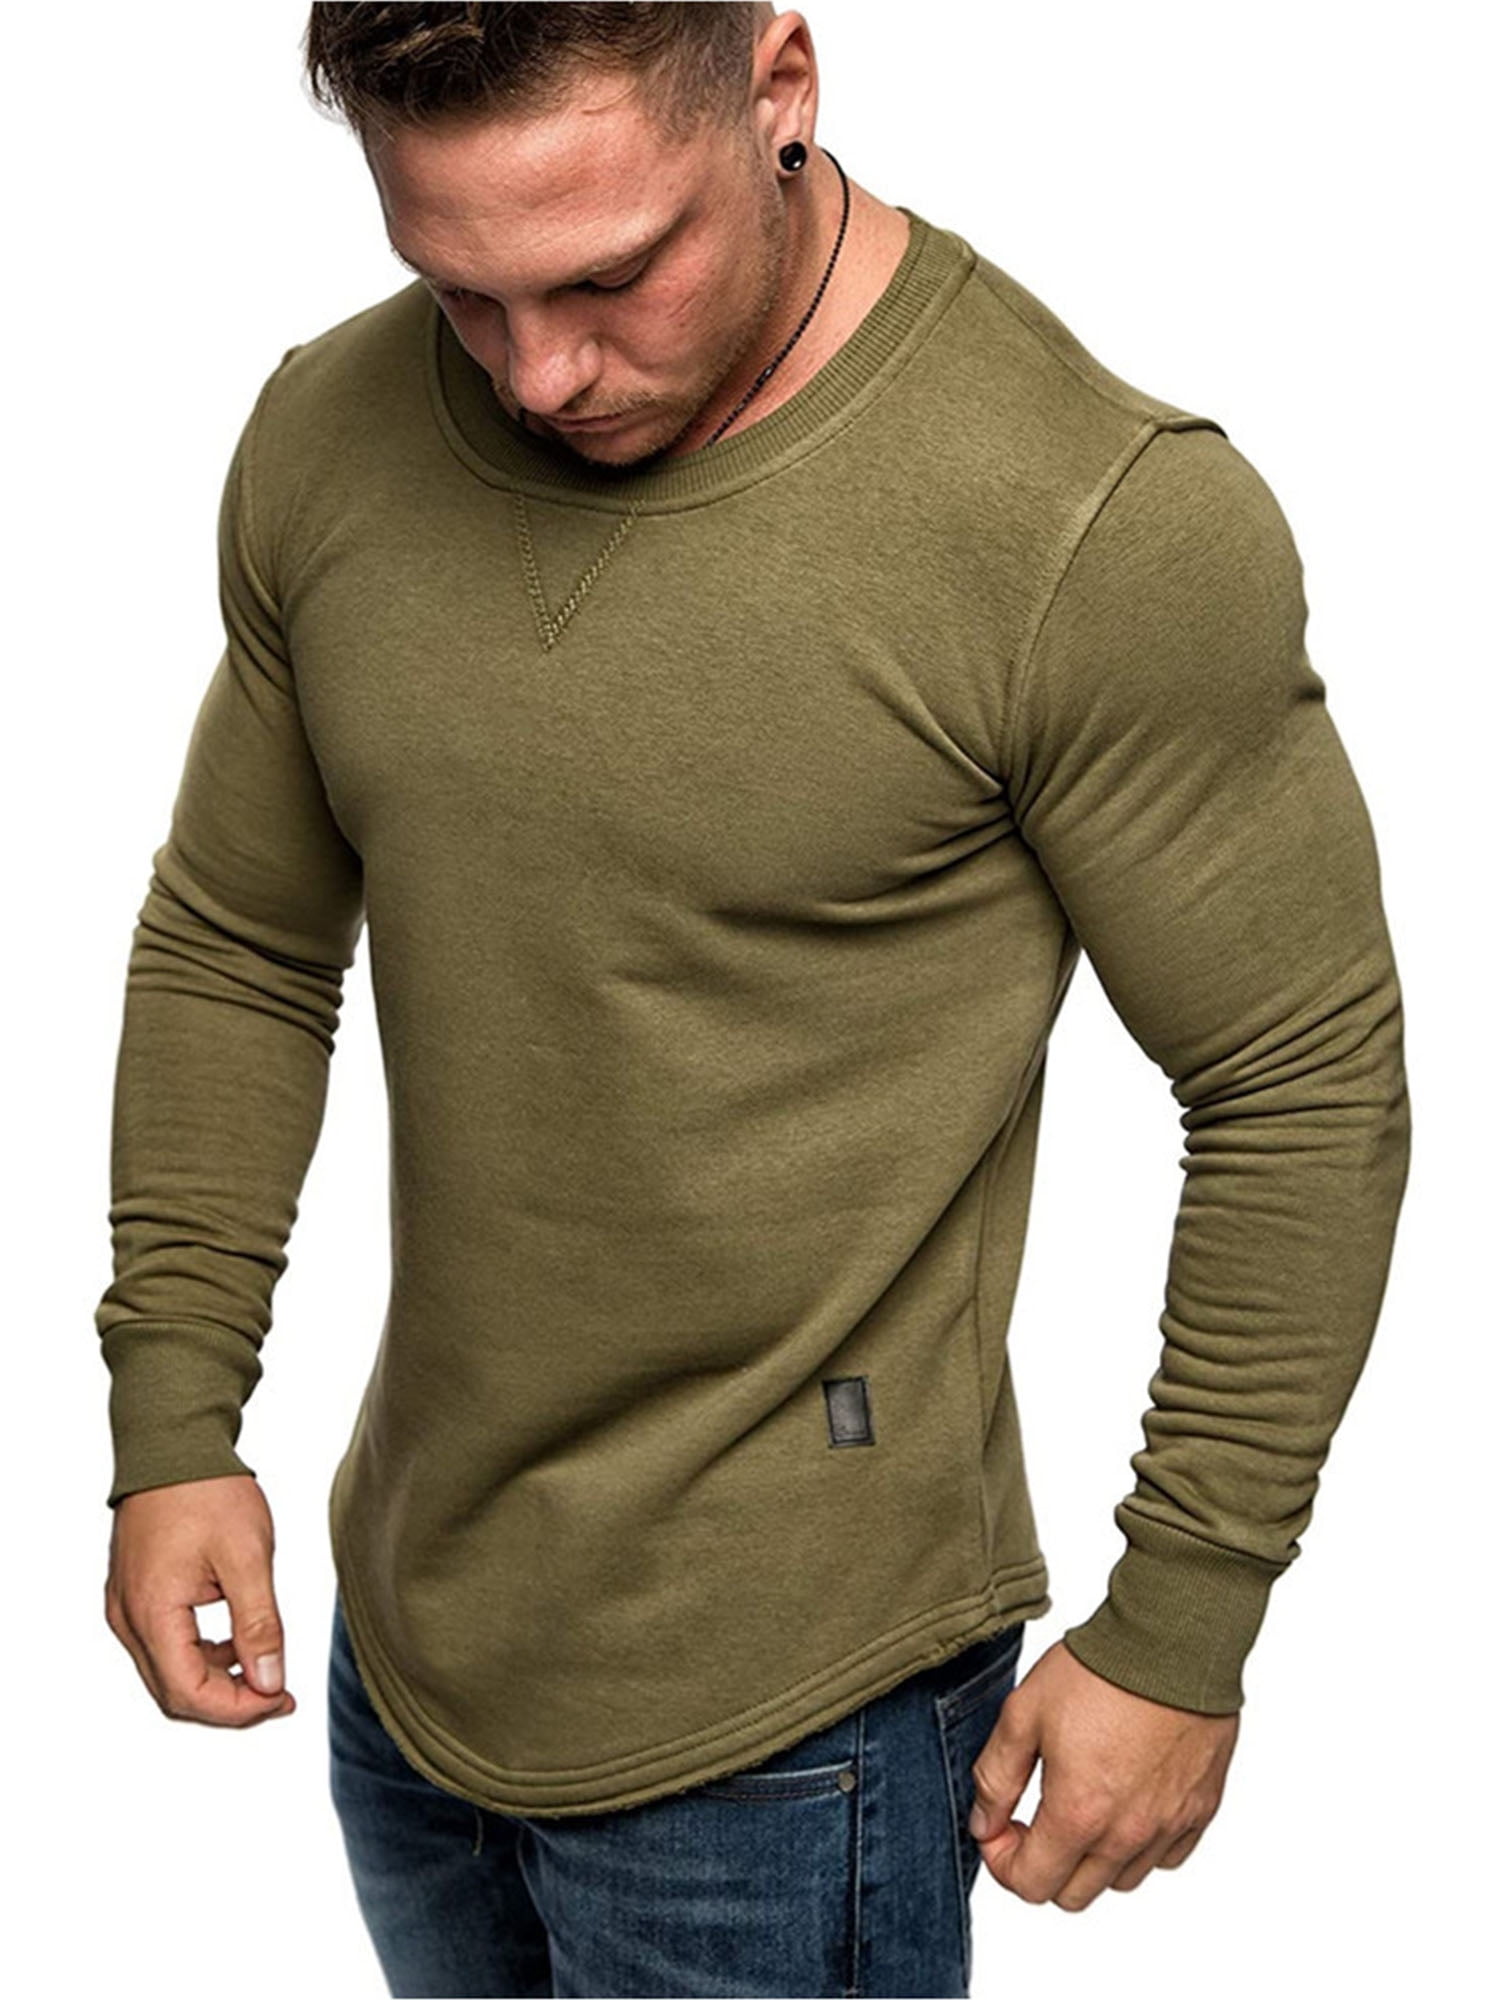 HiMONE - Athletic Works Mens and Men's Active Performance Long Sleeve ...